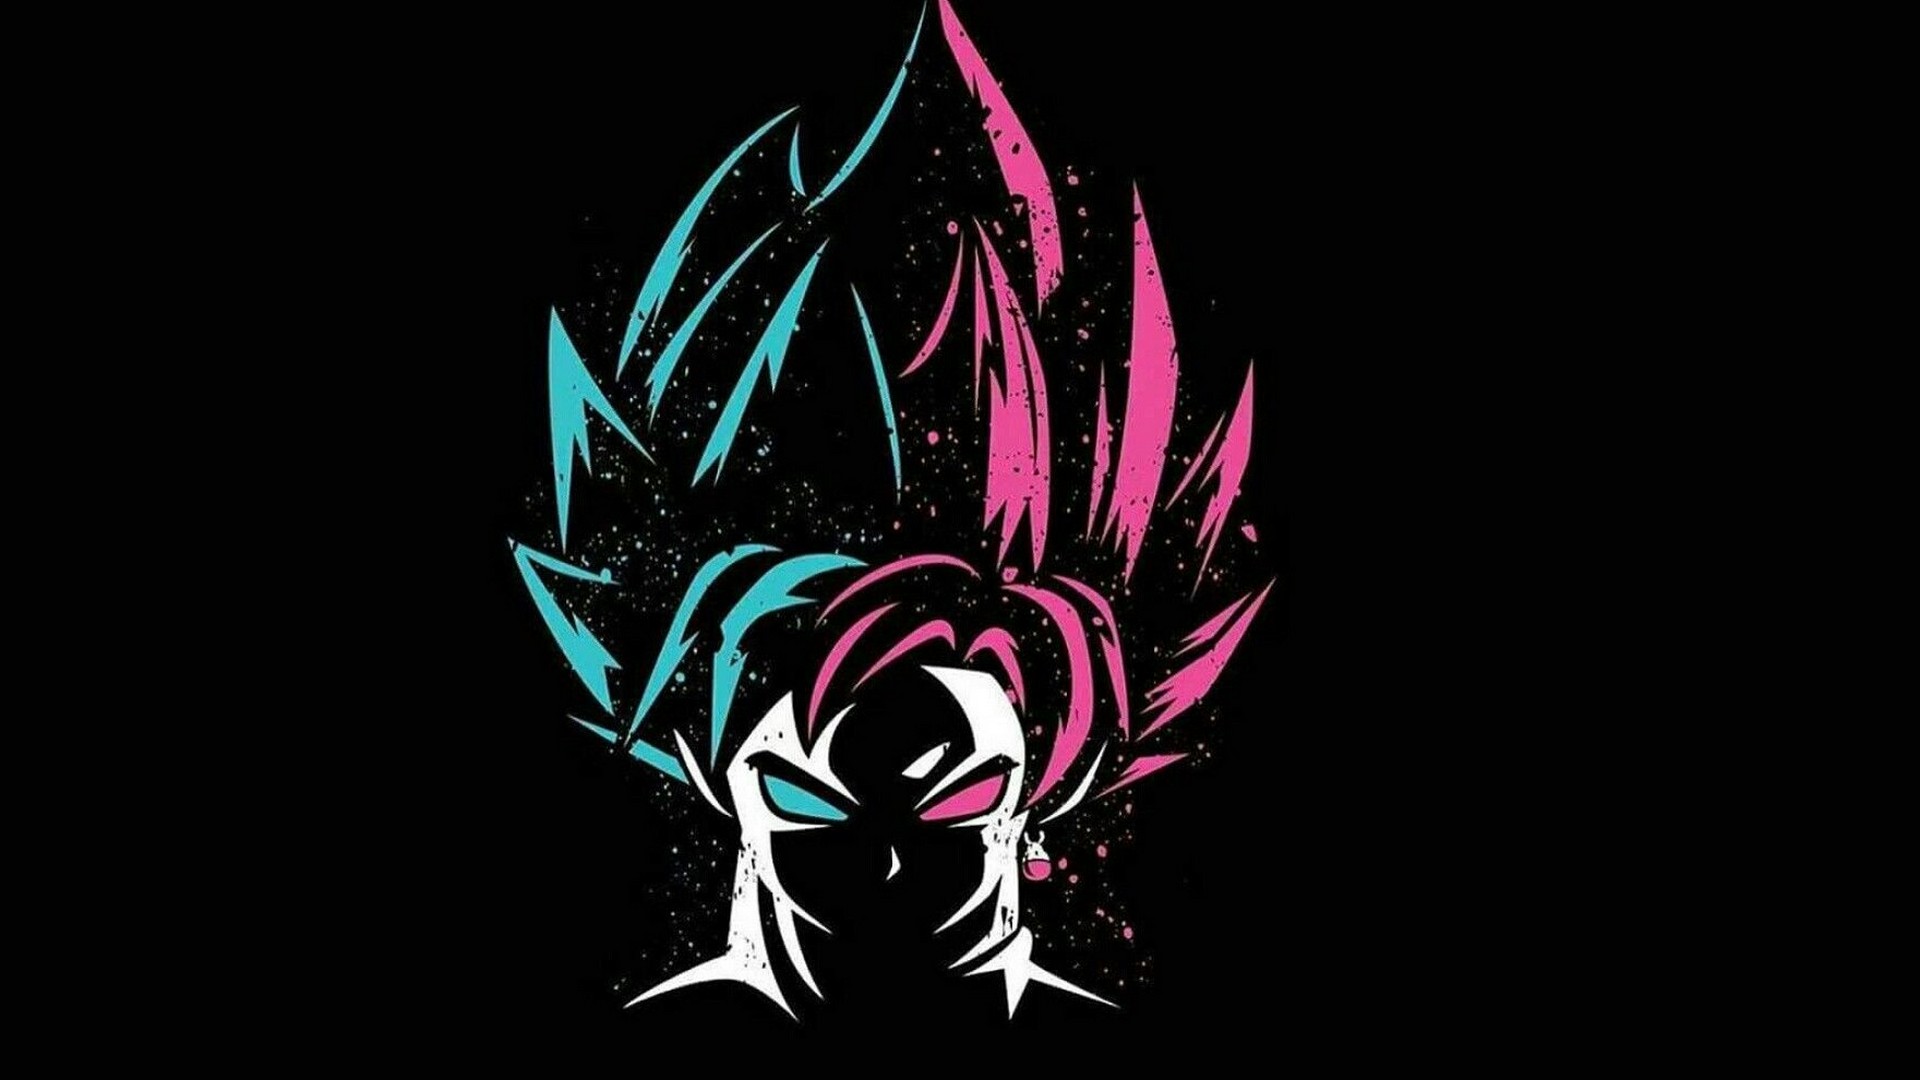 Black Goku Wallpaper with image resolution 1920x1080 pixel. You can use this wallpaper as background for your desktop Computer Screensavers, Android or iPhone smartphones